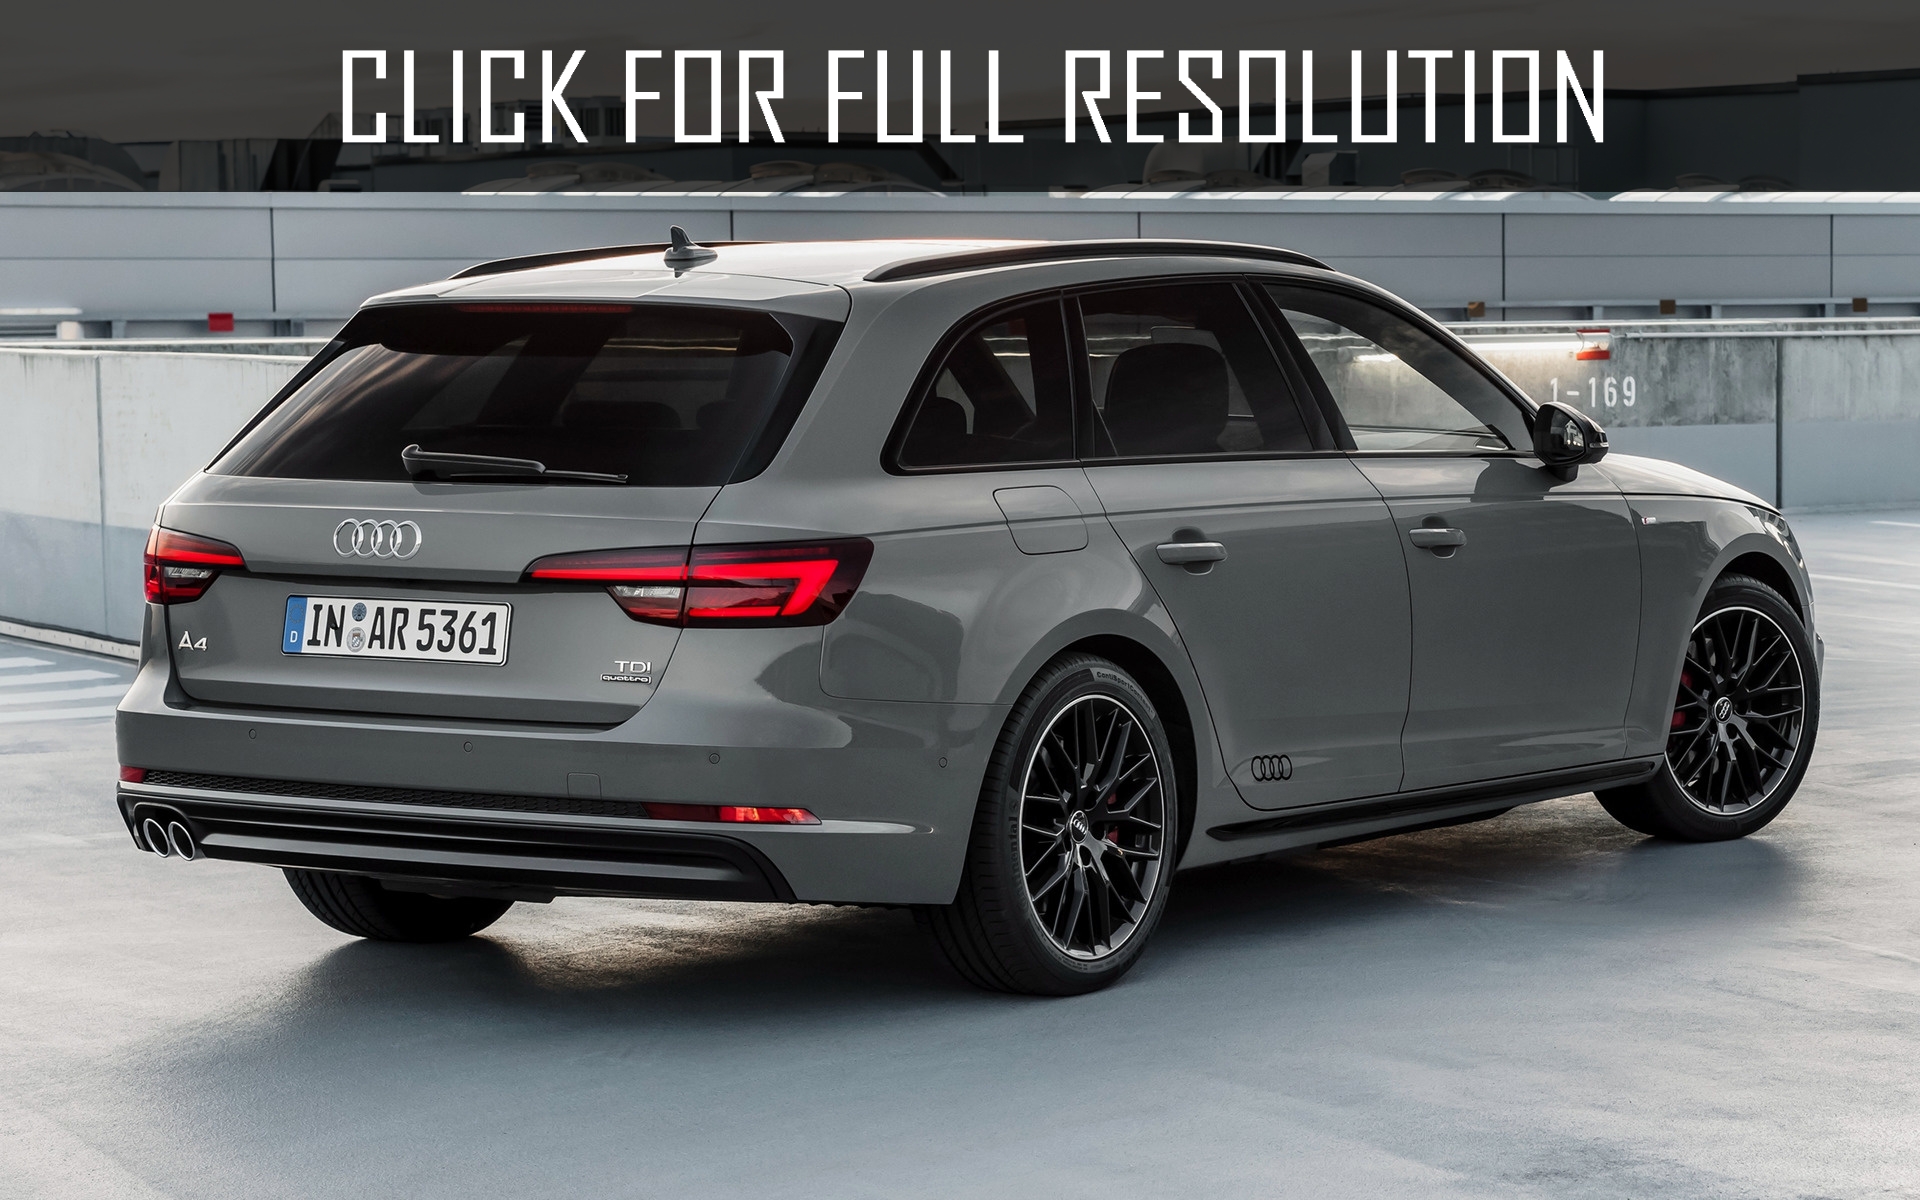 Audi A4 Avant Black Edition amazing photo gallery, some information